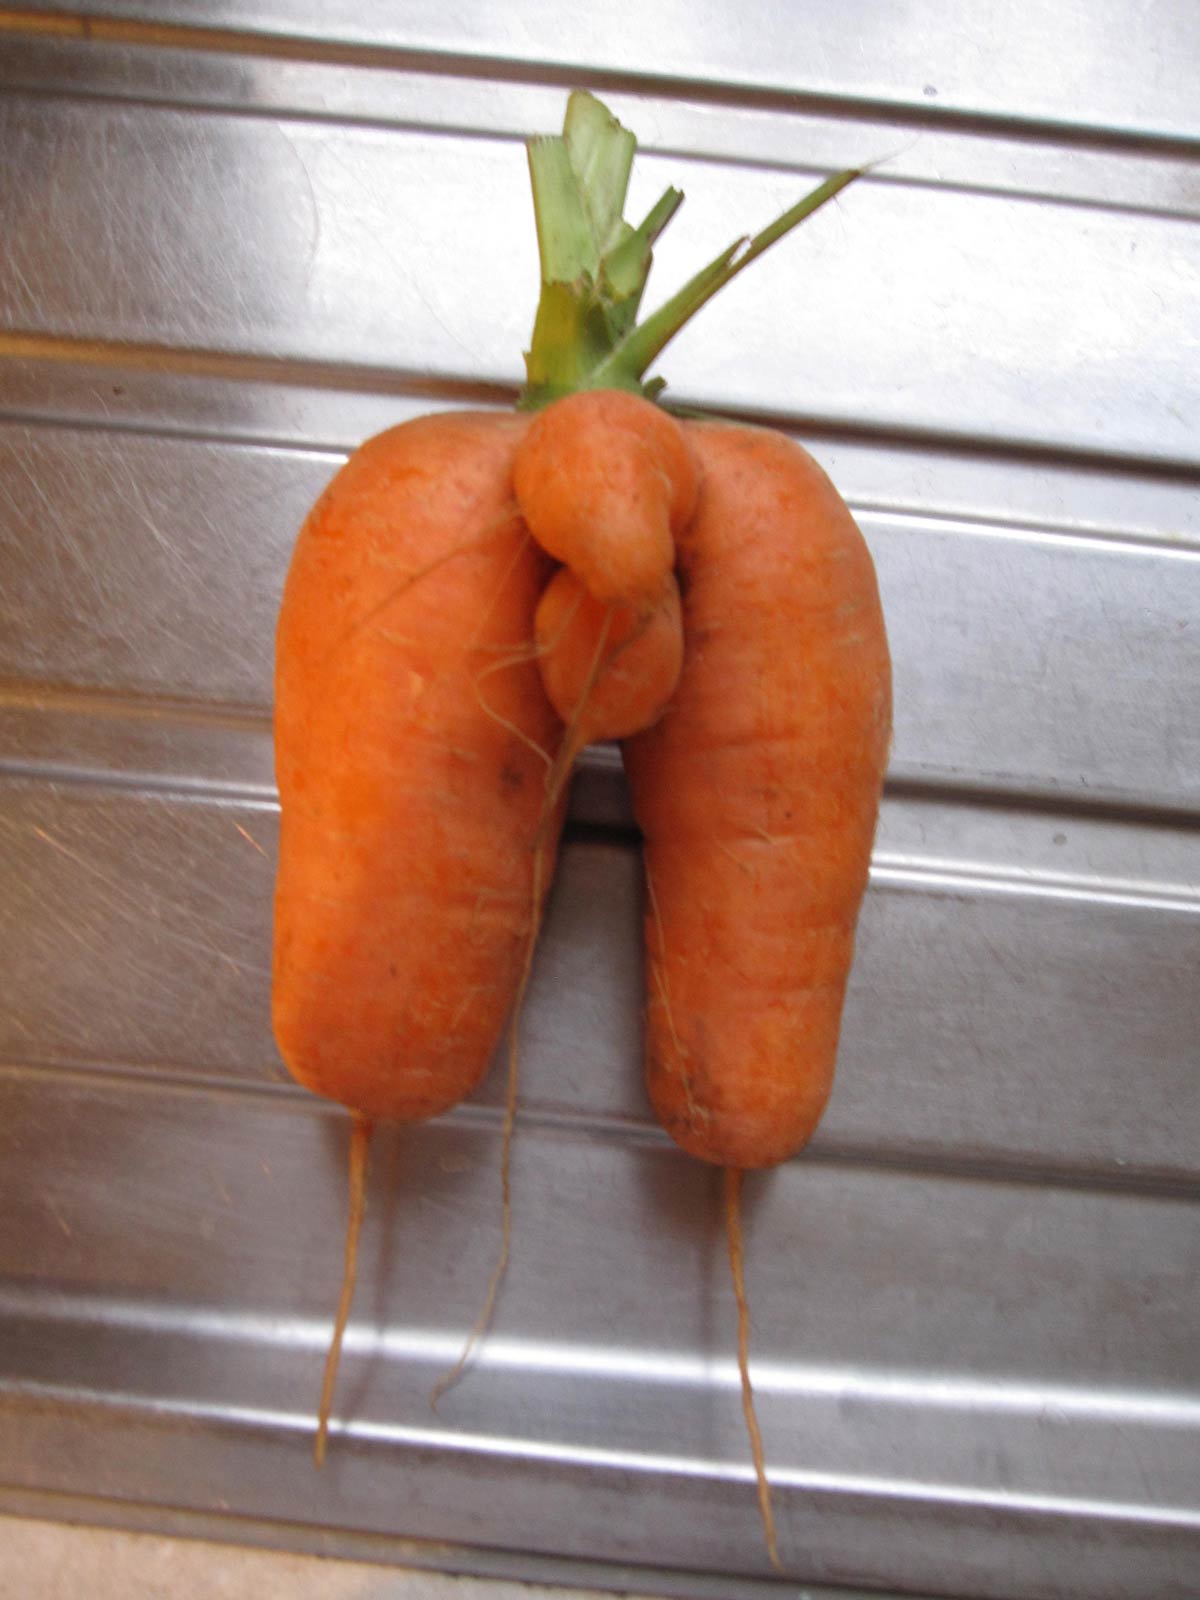 Just a carrot from the garden